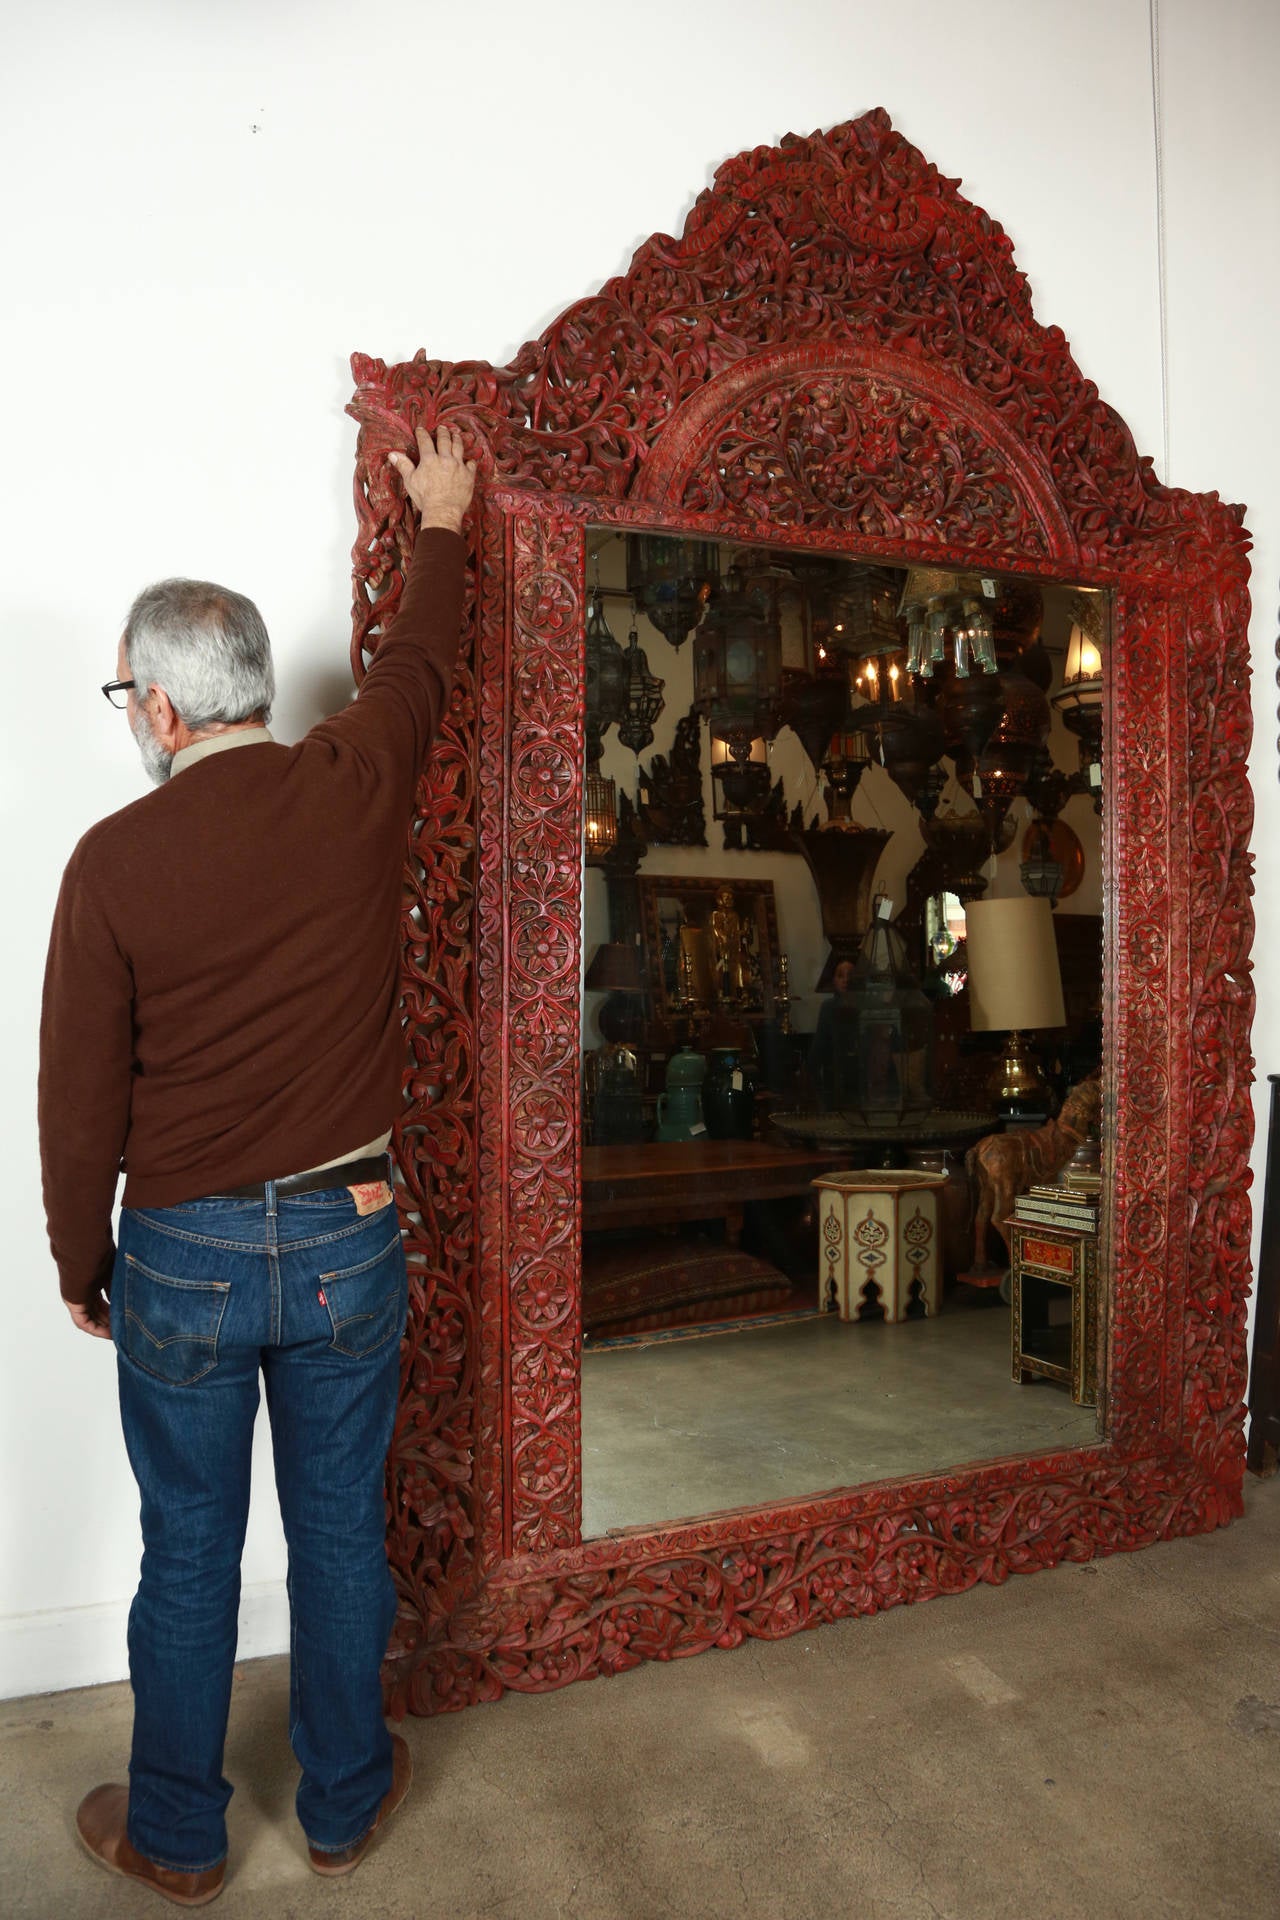 9' 8 giant Anglo-Indian mirror.
Mogul era heavily and finely hand-carved with floral design, amazing craftsmanship on frame mirror.
Taj Mahal style, Rajasthani work on wood, Moroccan style Mirror.

Very heavy, the mirror has multiple scratches